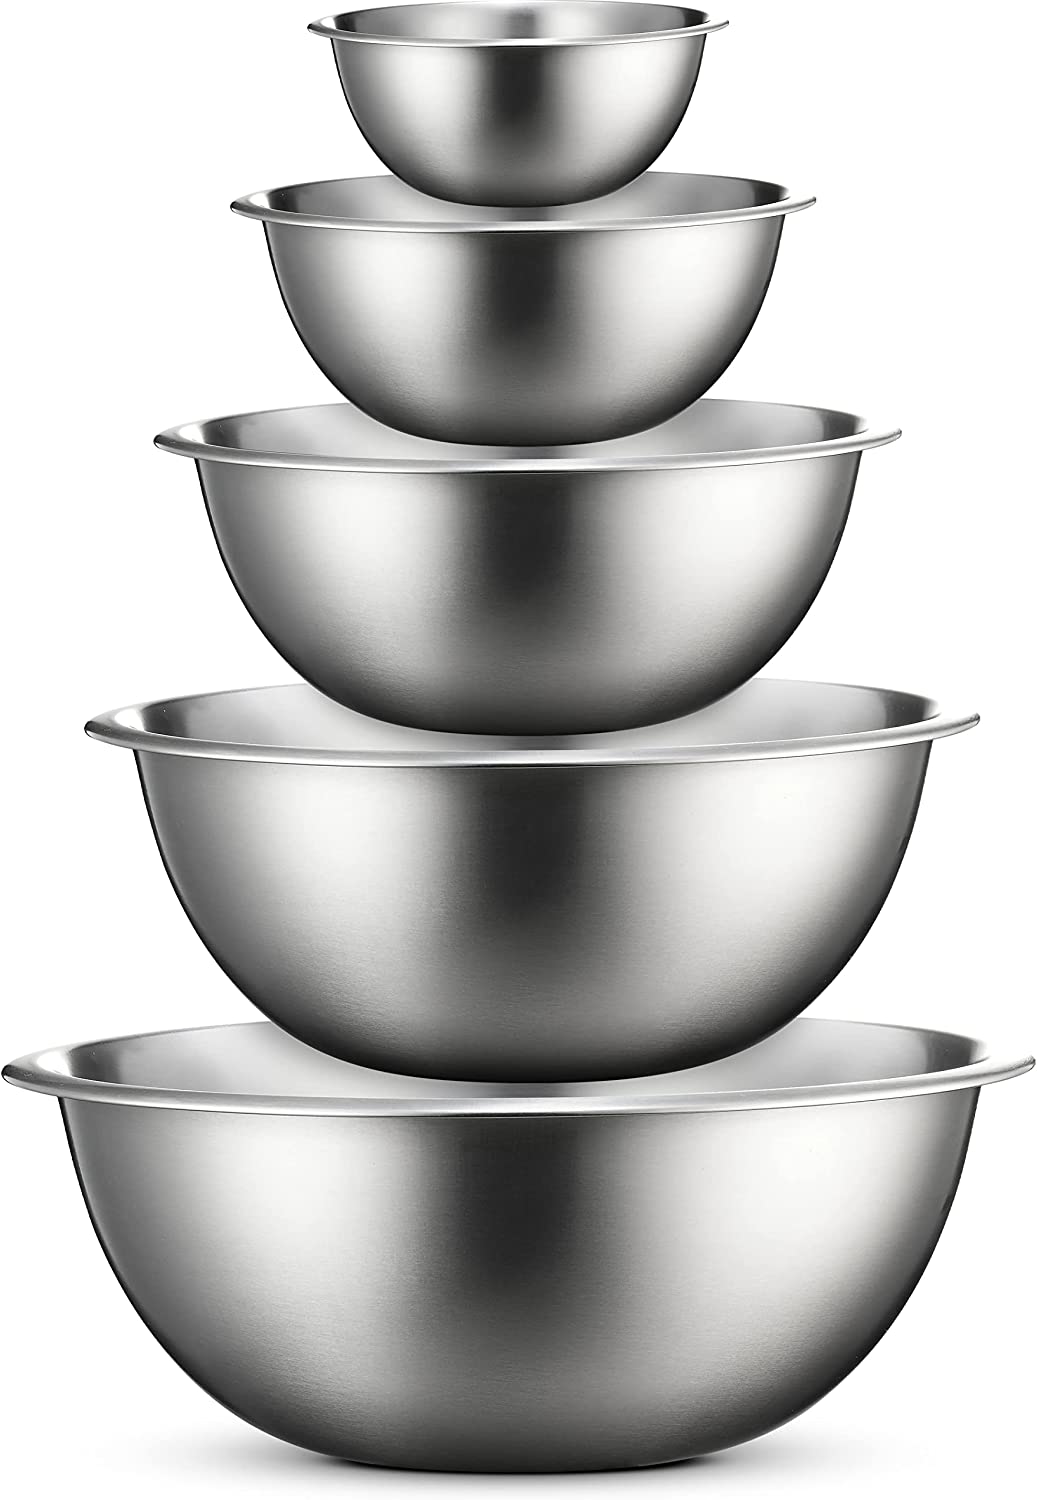 Stainless Steel Mixing Bowls Kitchen gifts